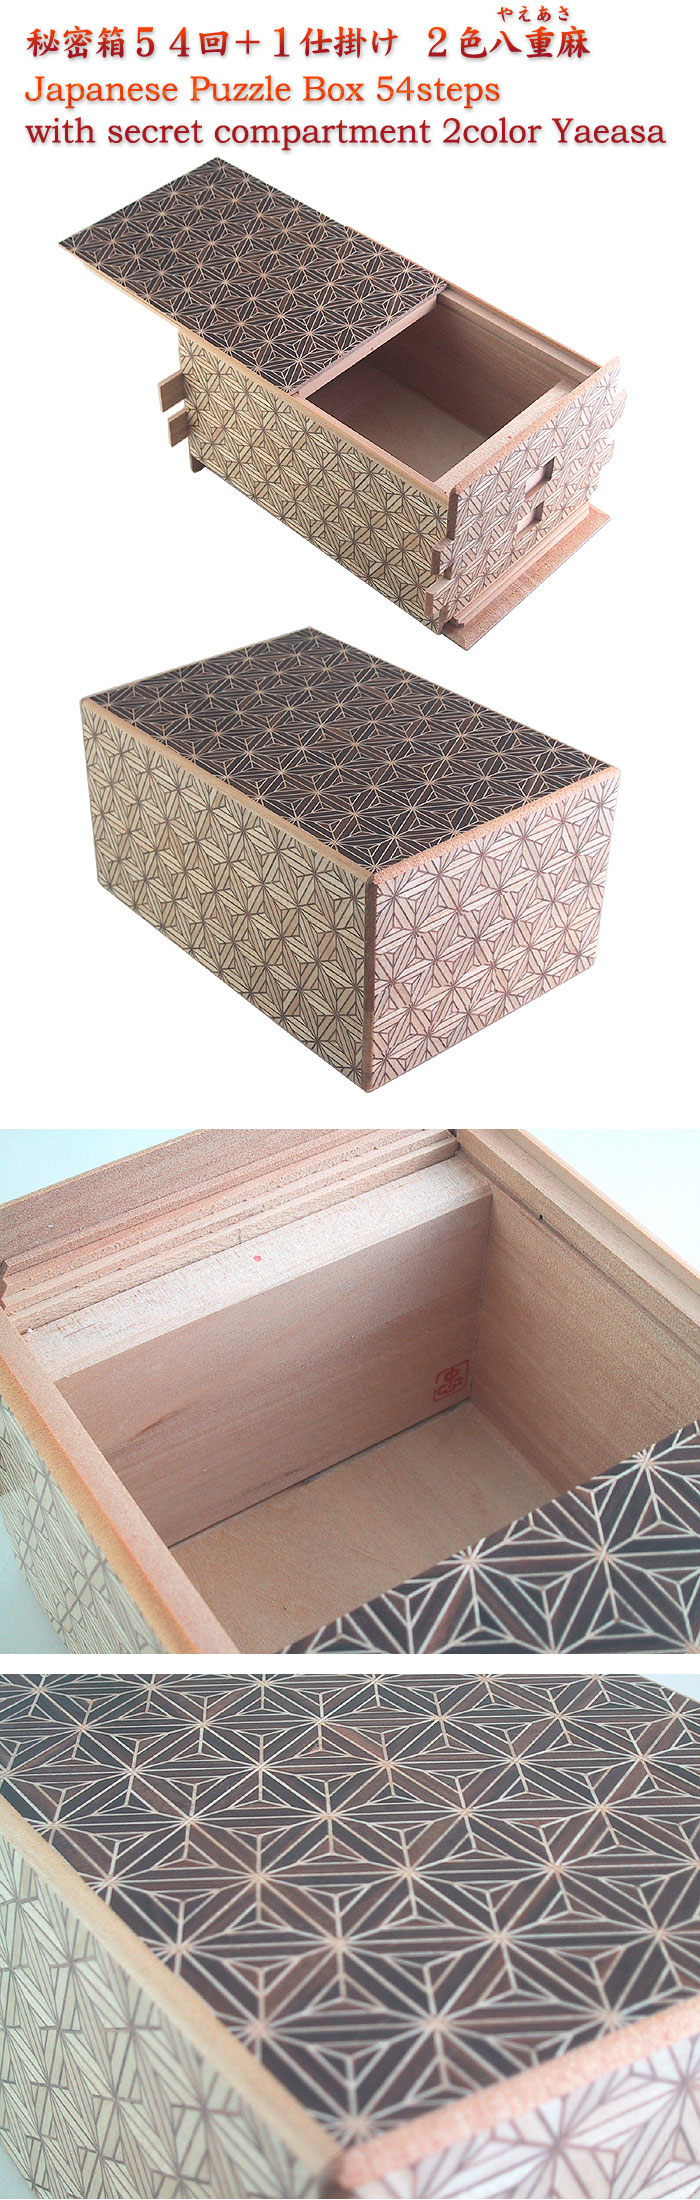 Japanese Puzzle Box 54steps with secret compartment 2color Yaeasa